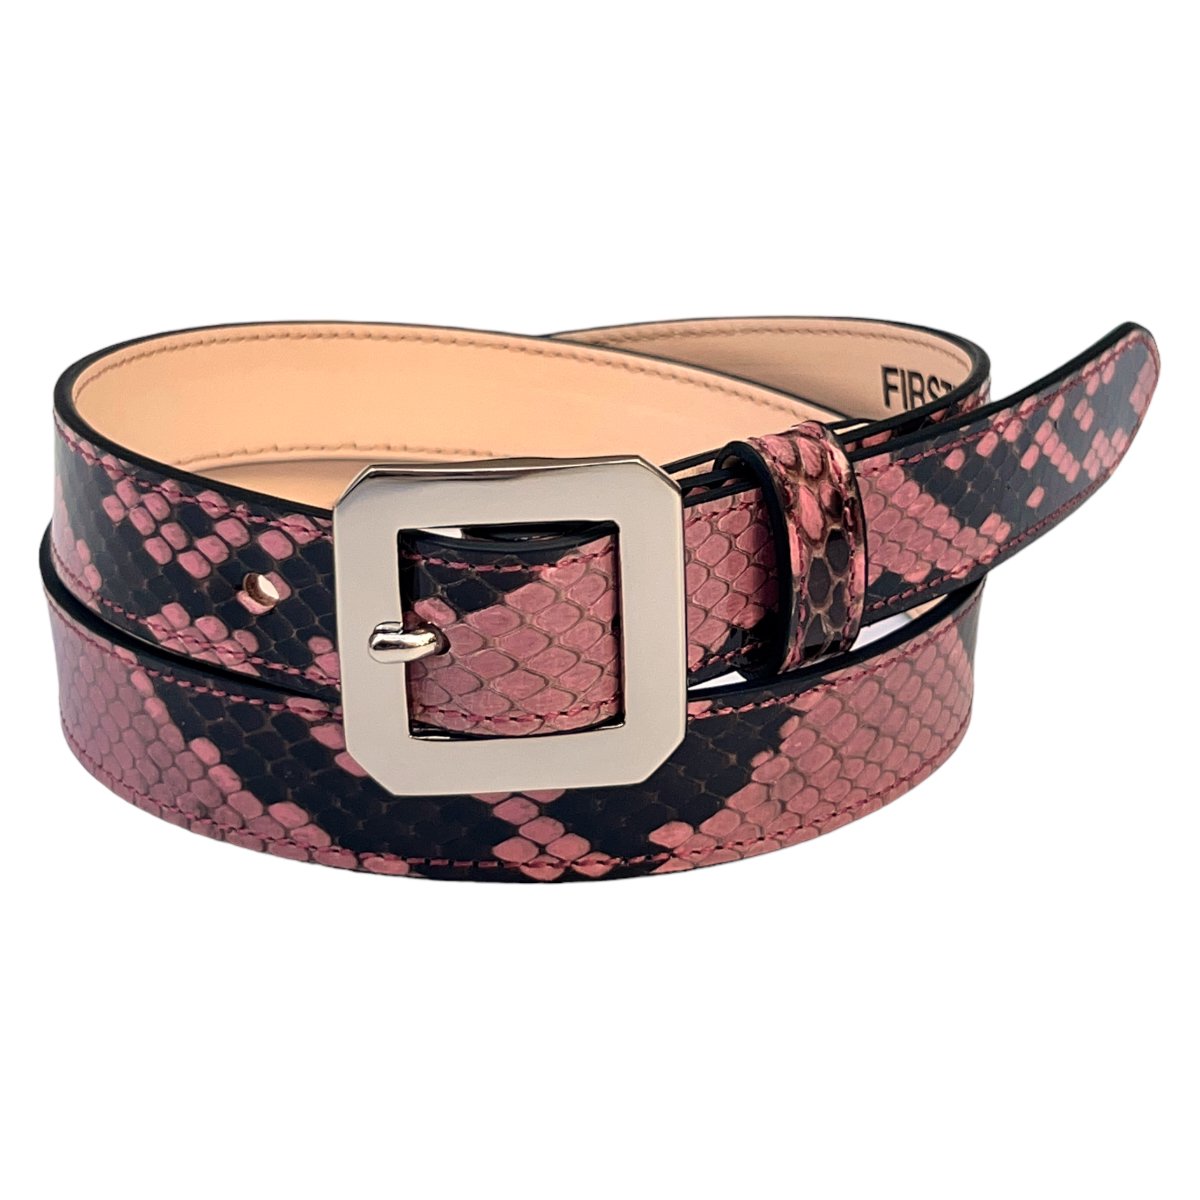 FIRSTRUST<BR>TRIBE / PYTHON LEATHER BELT | CHERRY BLOSSOMS